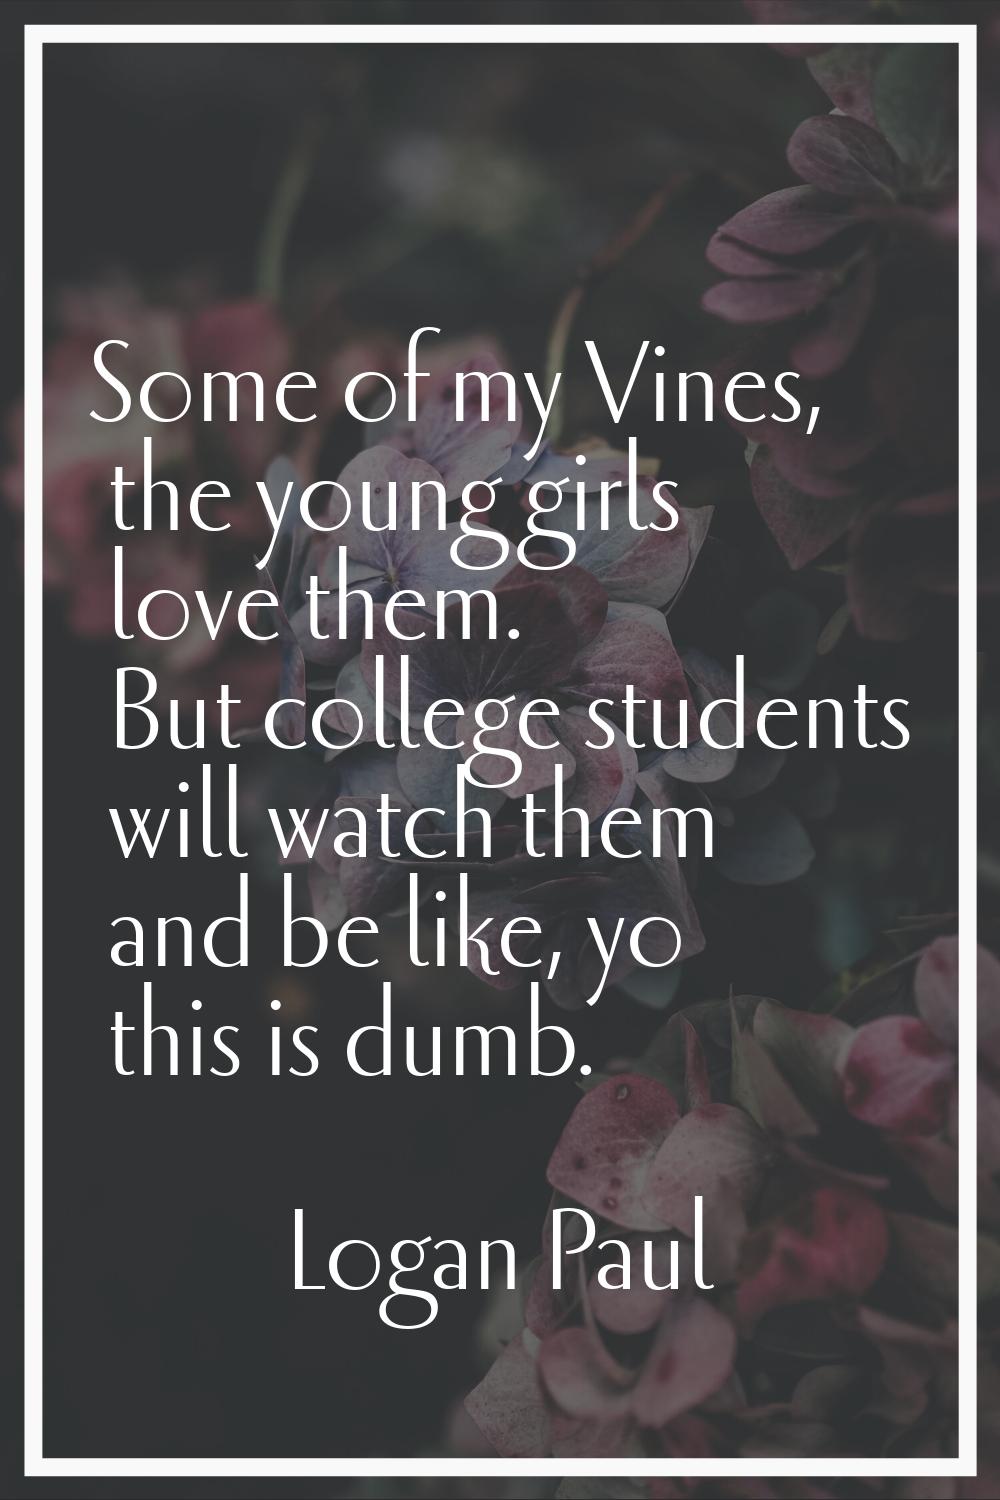 Some of my Vines, the young girls love them. But college students will watch them and be like, yo t